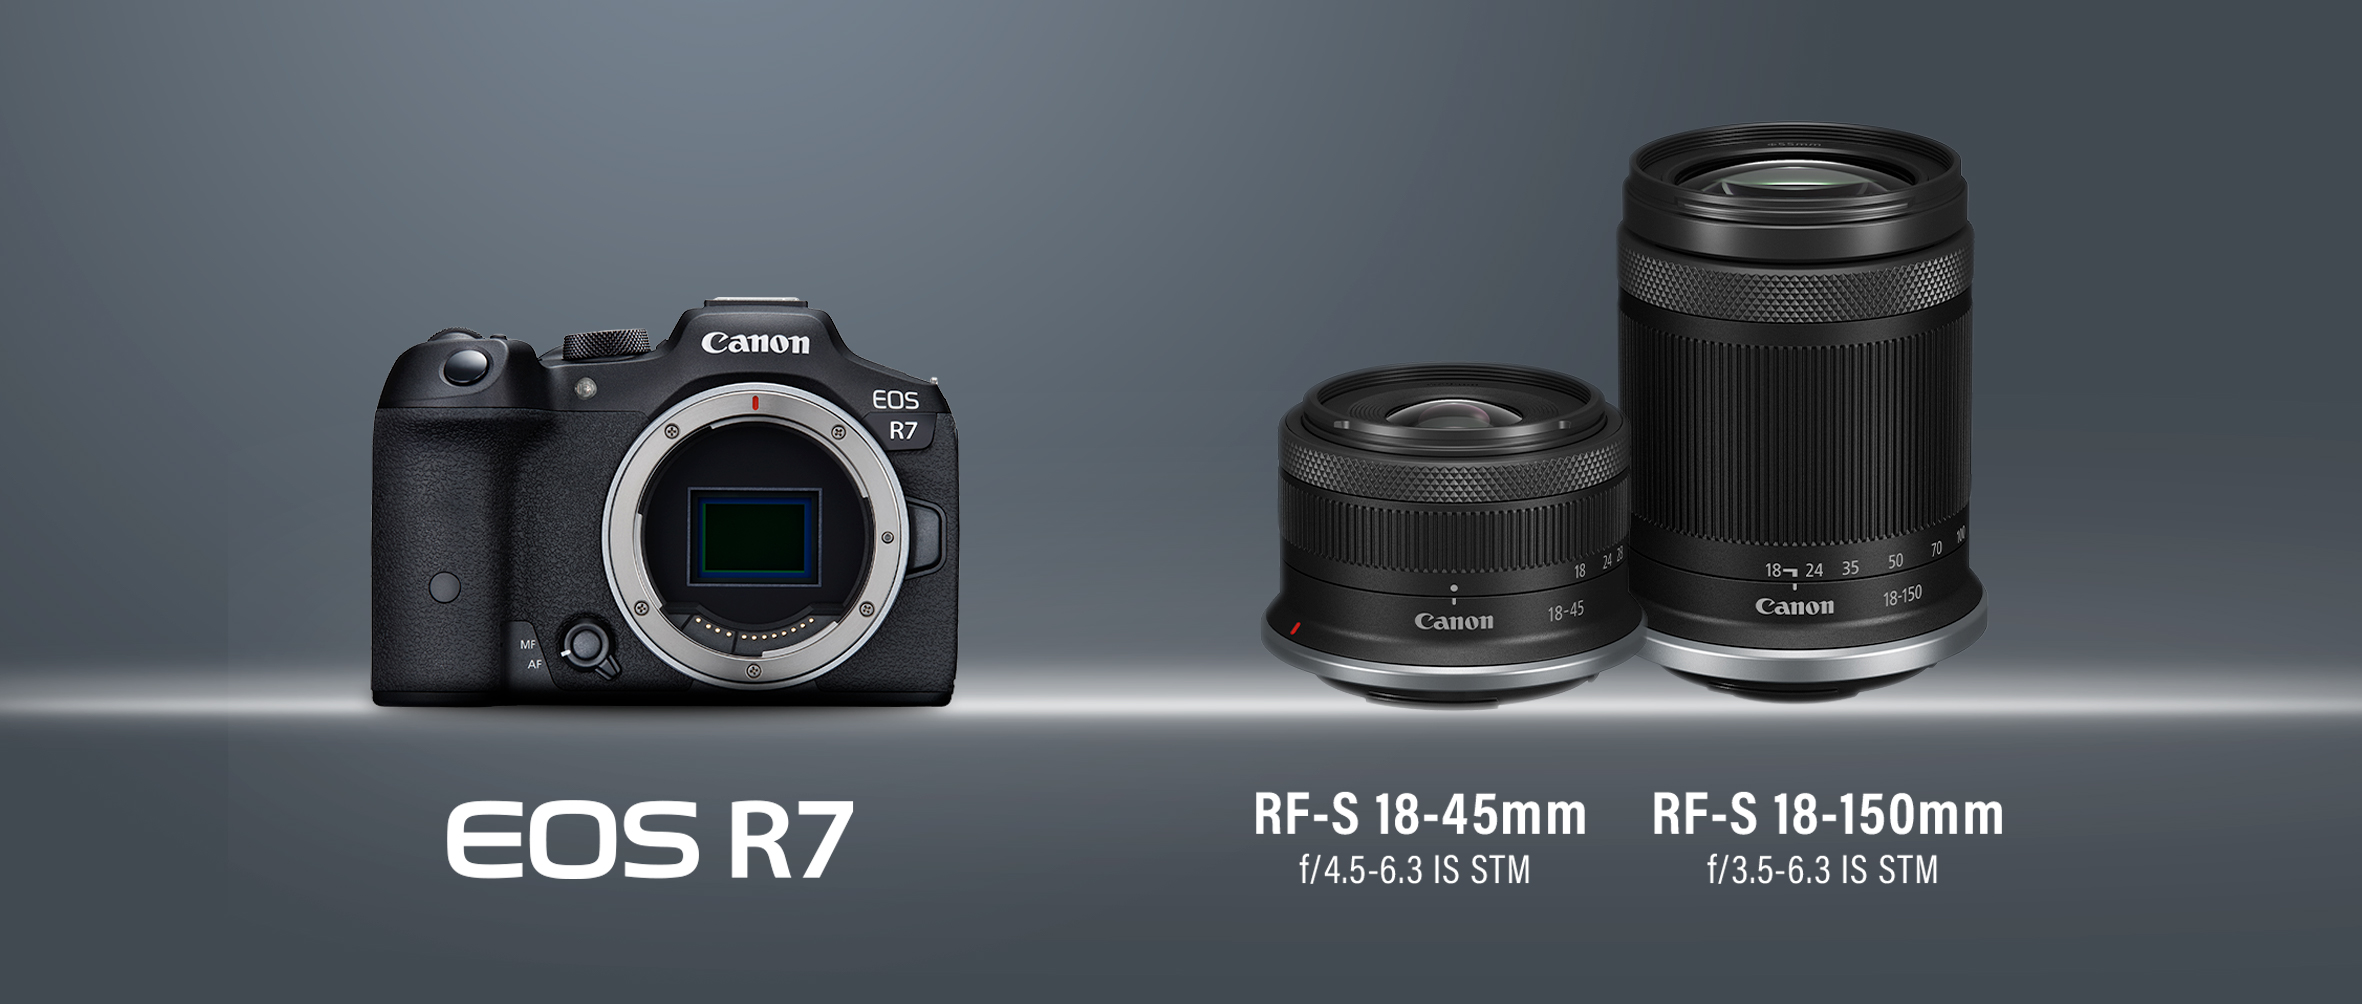 The Canon EOS R7 Mirrorless Camera Is Coming